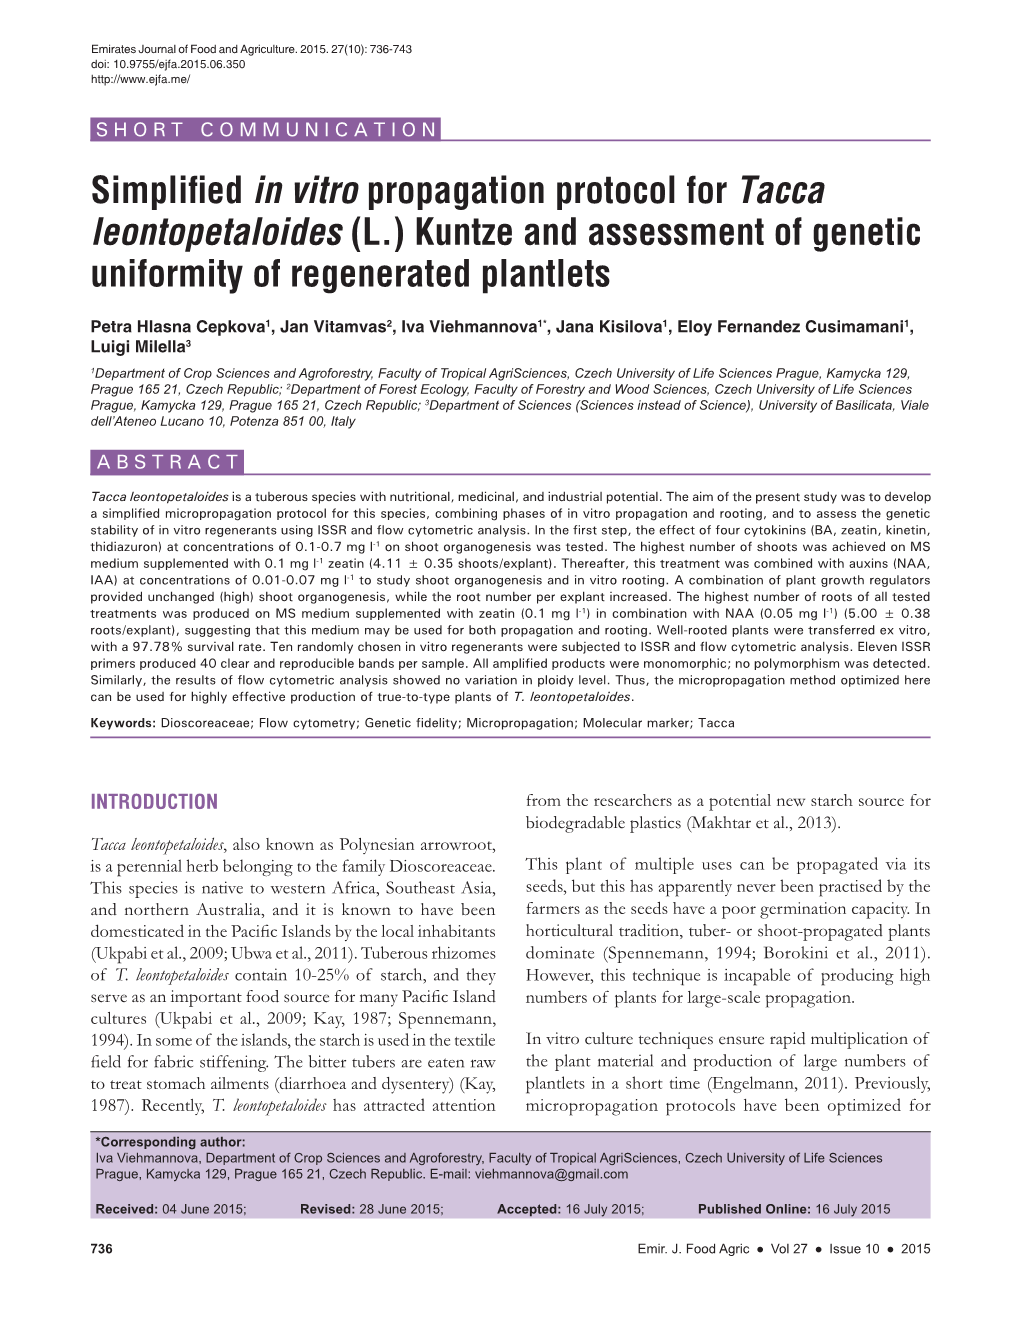 Simplified in Vitro Propagation Protocol for Tacca Leontopetaloides (L.) Kuntze and Assessment of Genetic Uniformity of Regenerated Plantlets